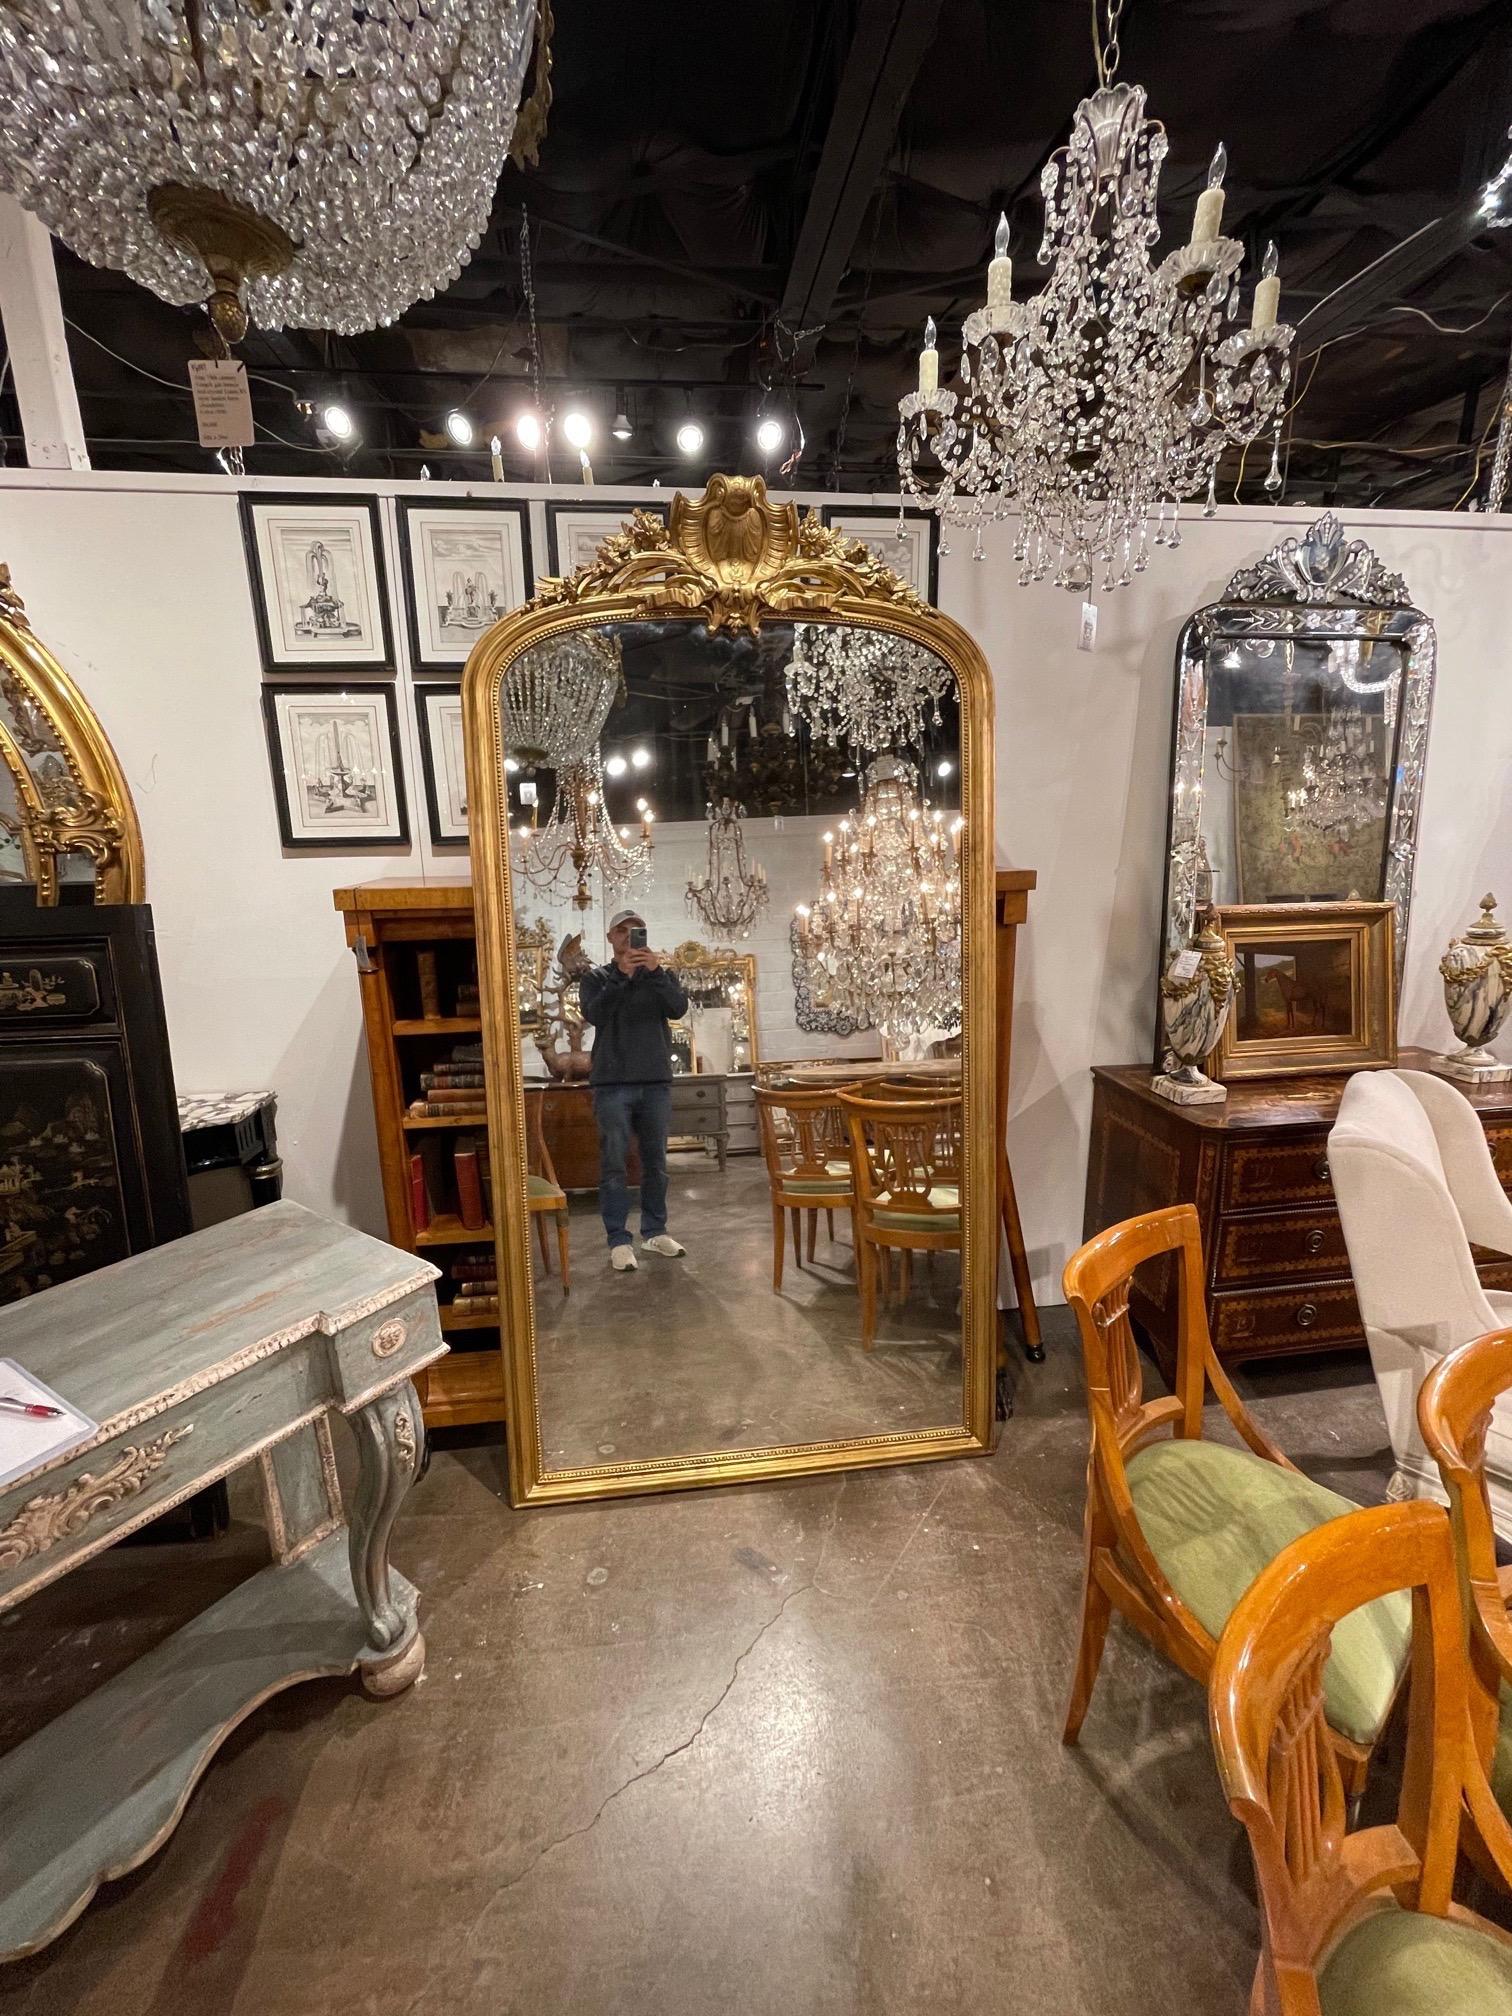 Large scale 19th century French Louis XV style giltwood floor mirror. Beautiful carved details including flowers and a crown at the top. Very impressive!!